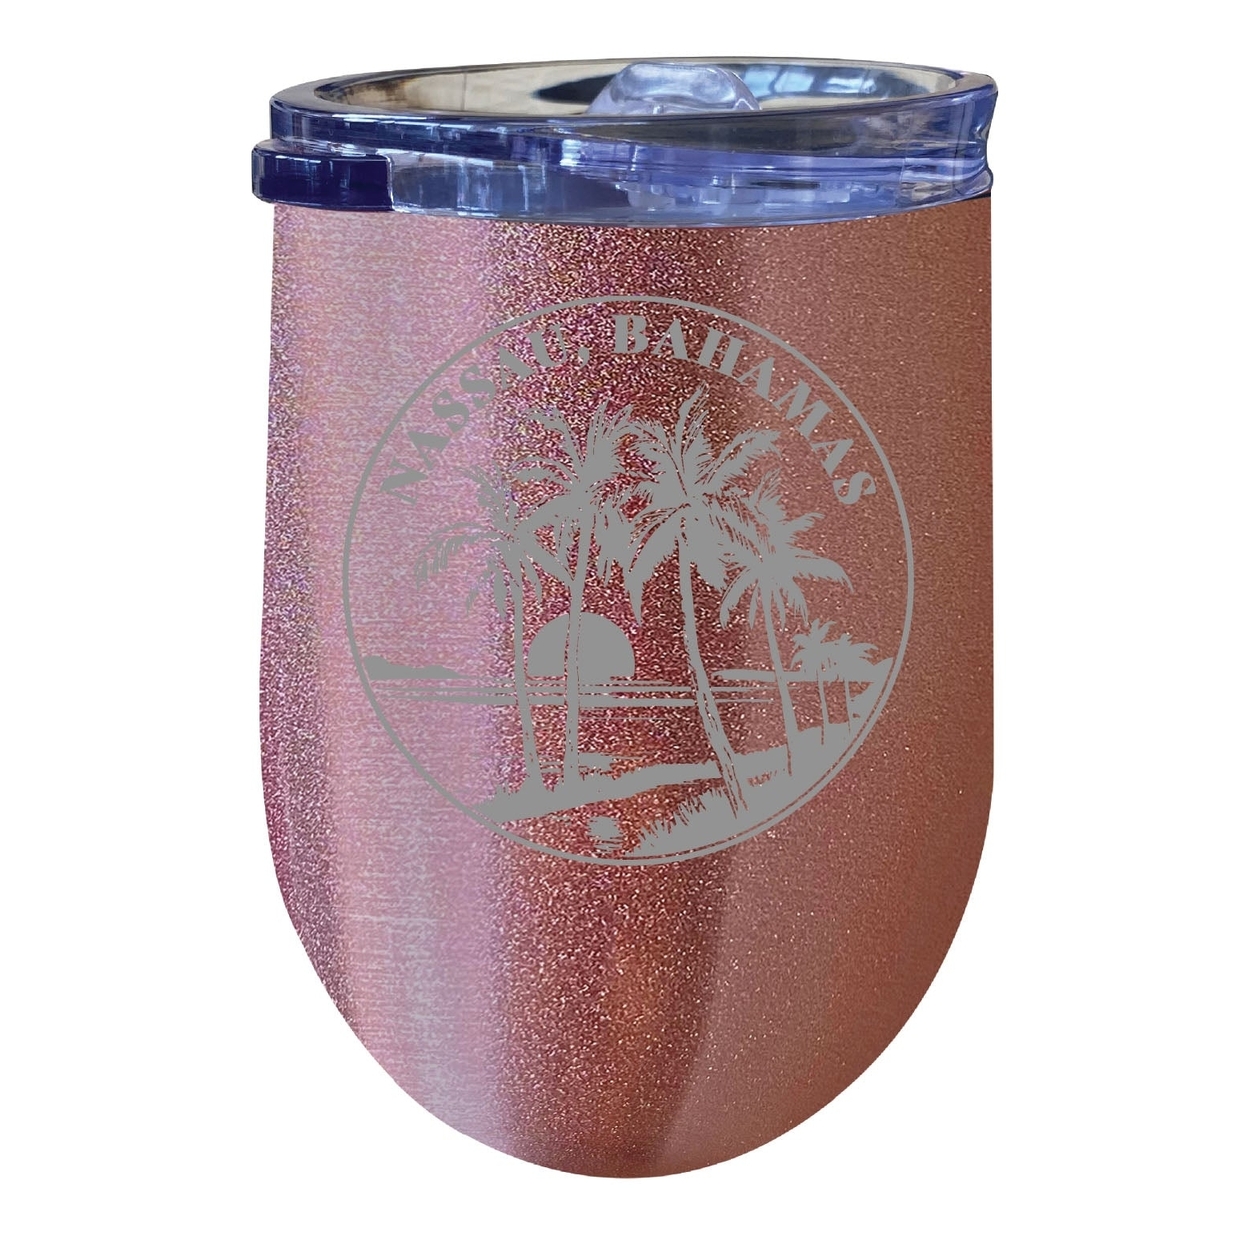 Nassau The Bahamas Souvenir 12 Oz Engraved Insulated Wine Stainless Steel Tumbler - Rose Gold,,4-Pack